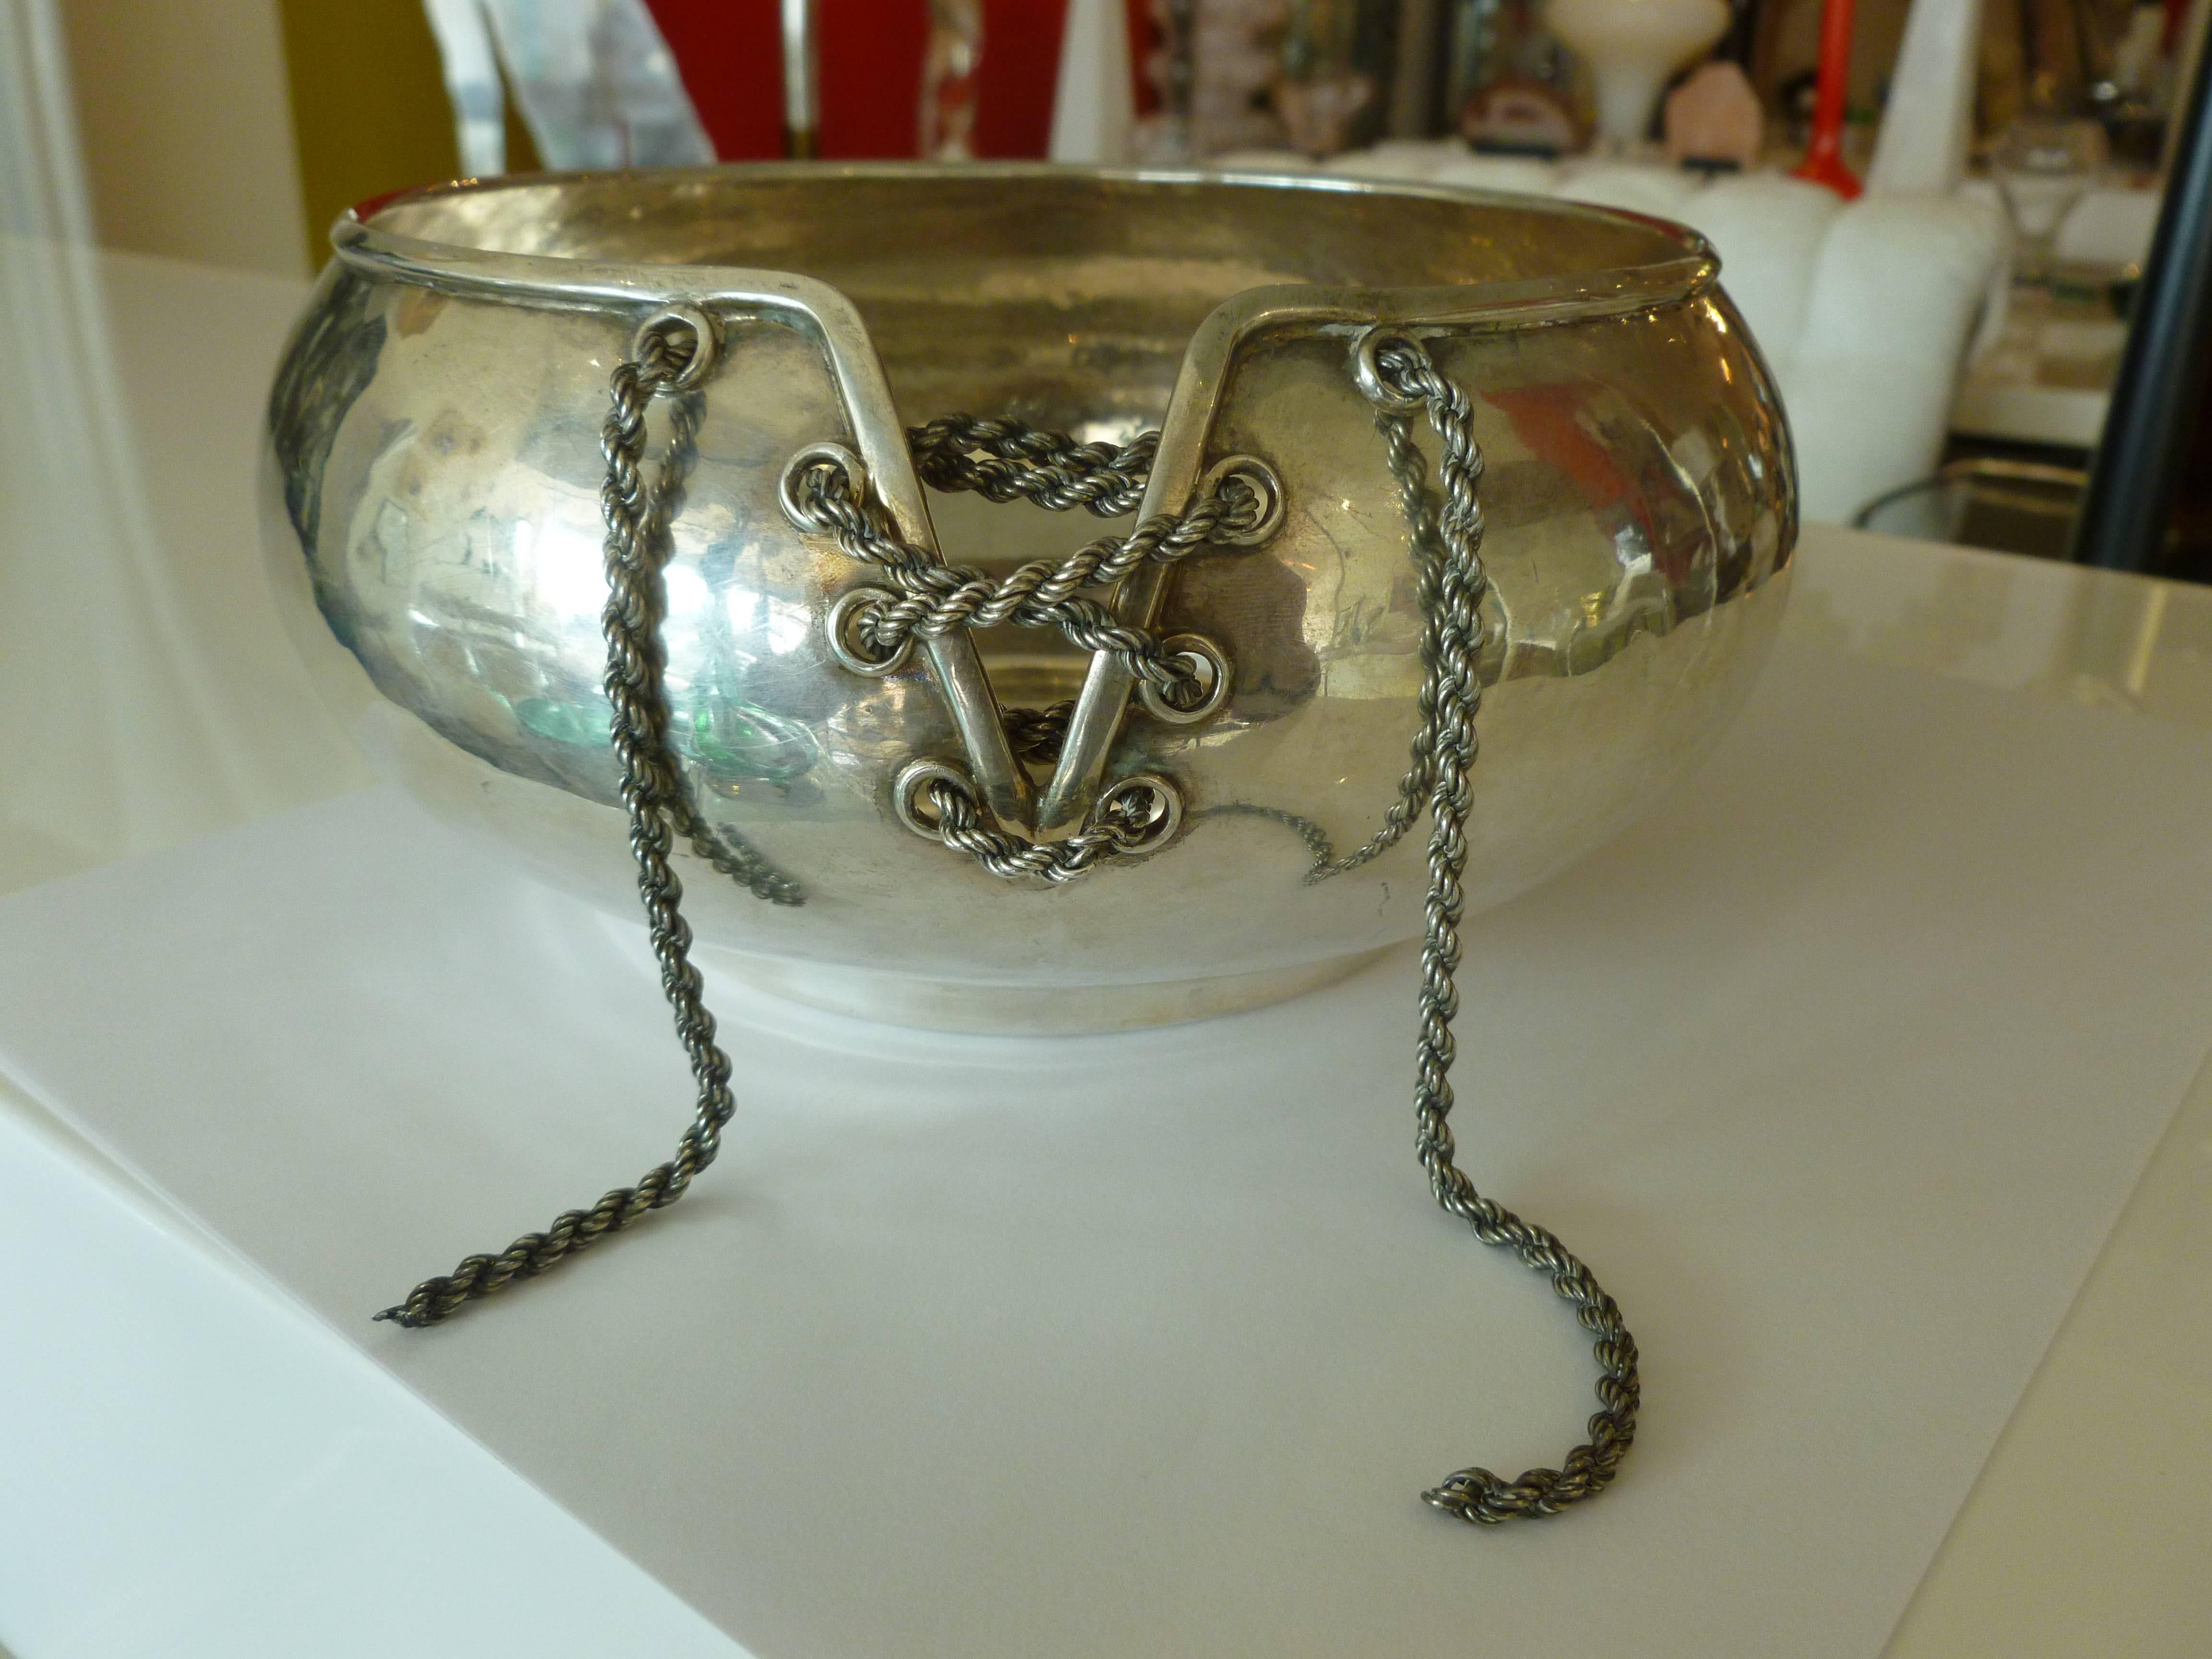 This sexy Italian hand-forged silver bowl has a chain corset in the front. The lace up corset is of a chain in silver. This is very Jean Paul Gautier in style.
It can be used for multiple purposes as a bowl or even as a champagne caddy.
it is